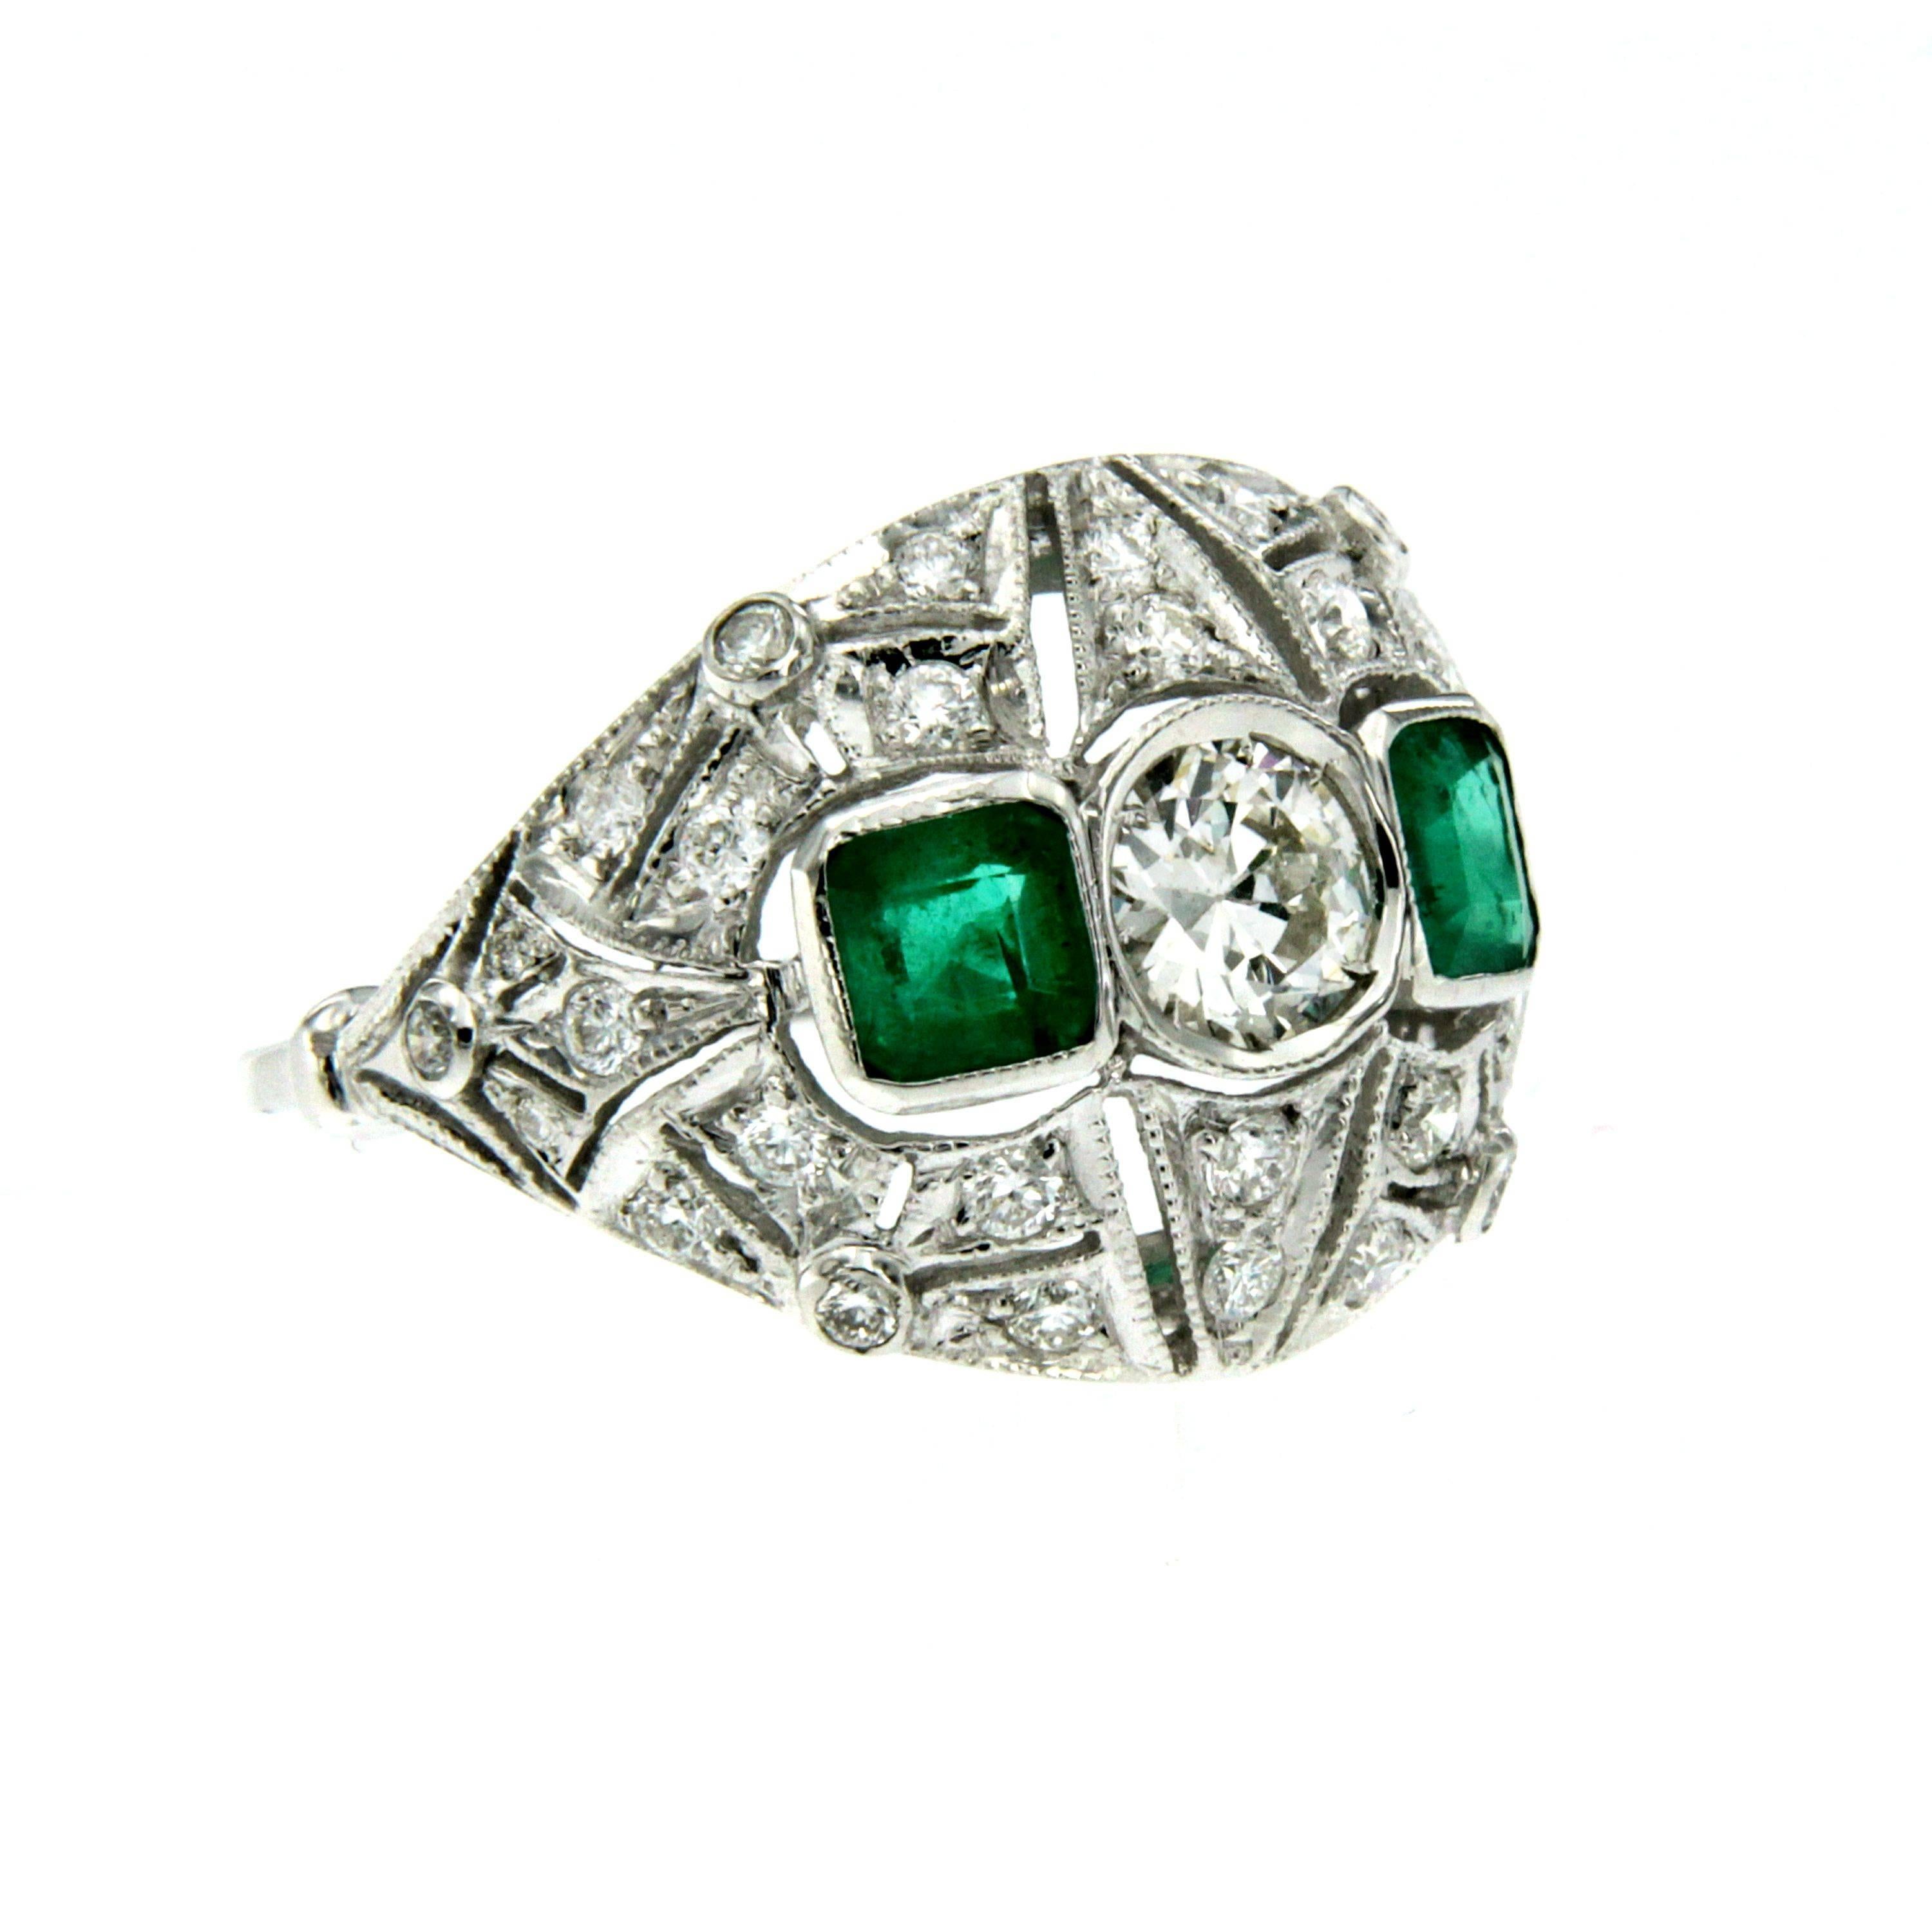 Stunning Art Deco gold ring set in the center with approx. 0.50 ct old mine cut diamond surronded by approx. 0.38 cts of old mine cut diamonds and approx. 0.72 ct of colombian emeralds.
Circa 1930

CONDITION: Pre-owned - Excellent
METAL: 18k